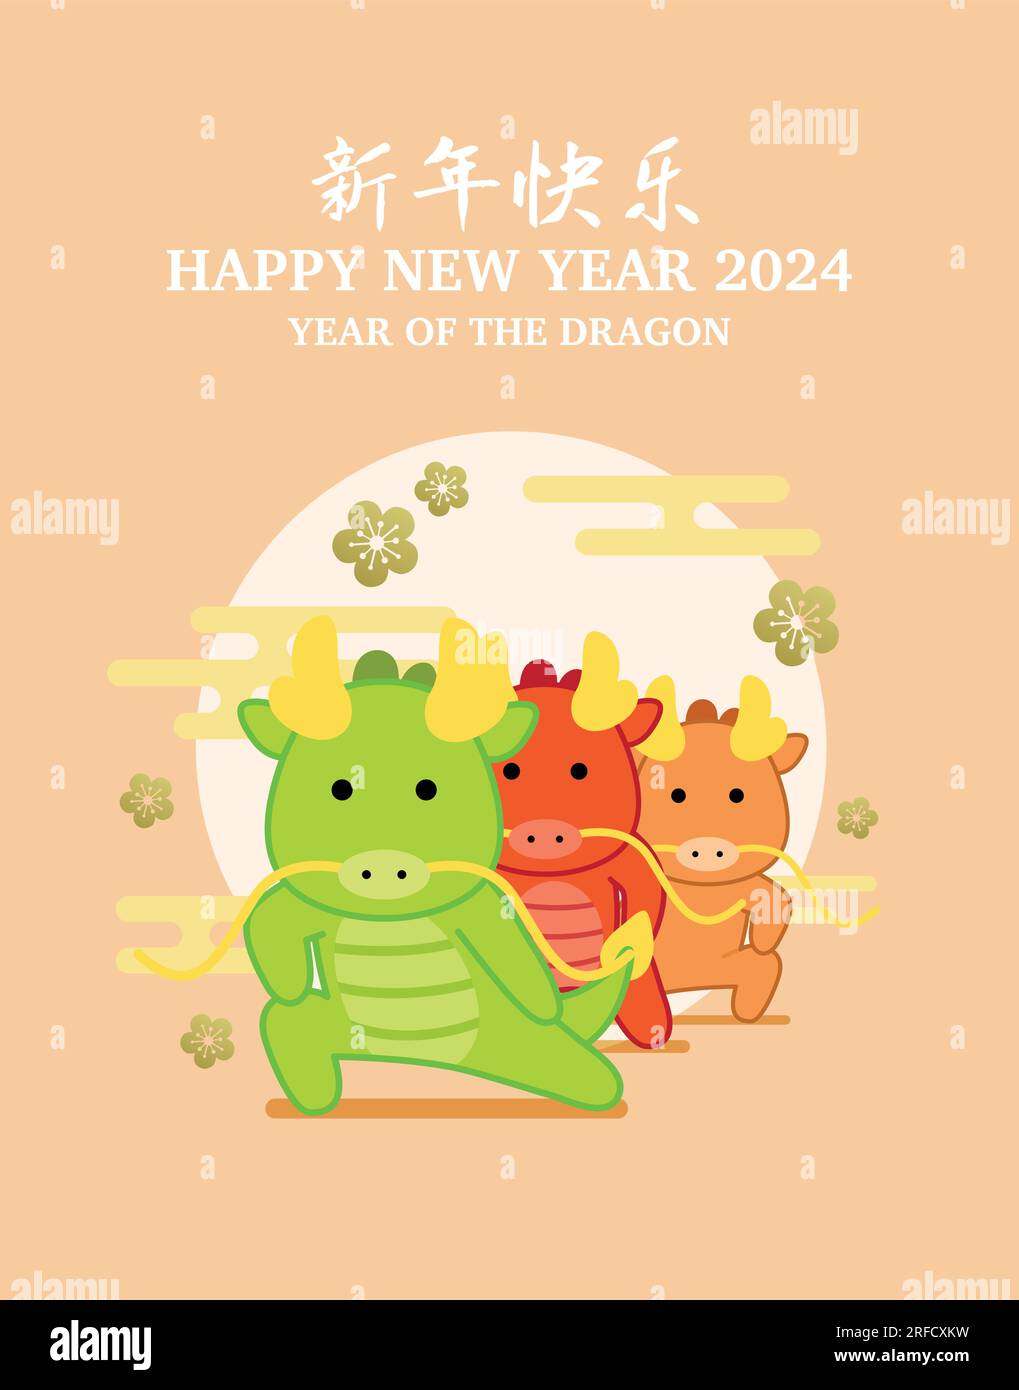 How to Decorate for Chinese New Year 2024